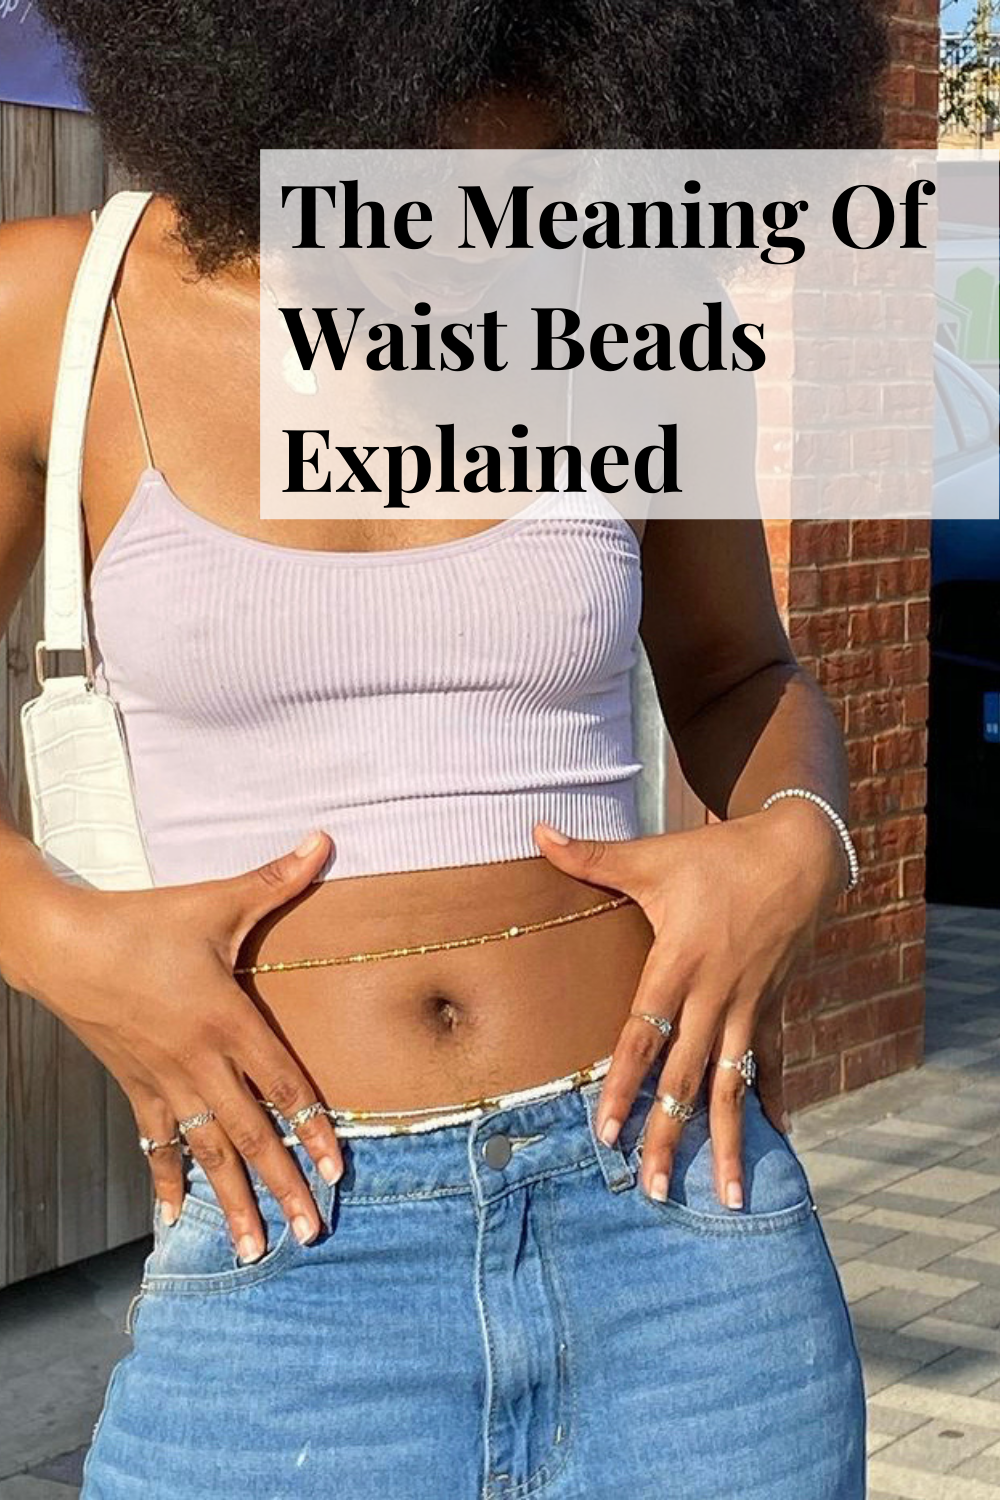 What is the meaning of Waist Beads? – Fason De Viv